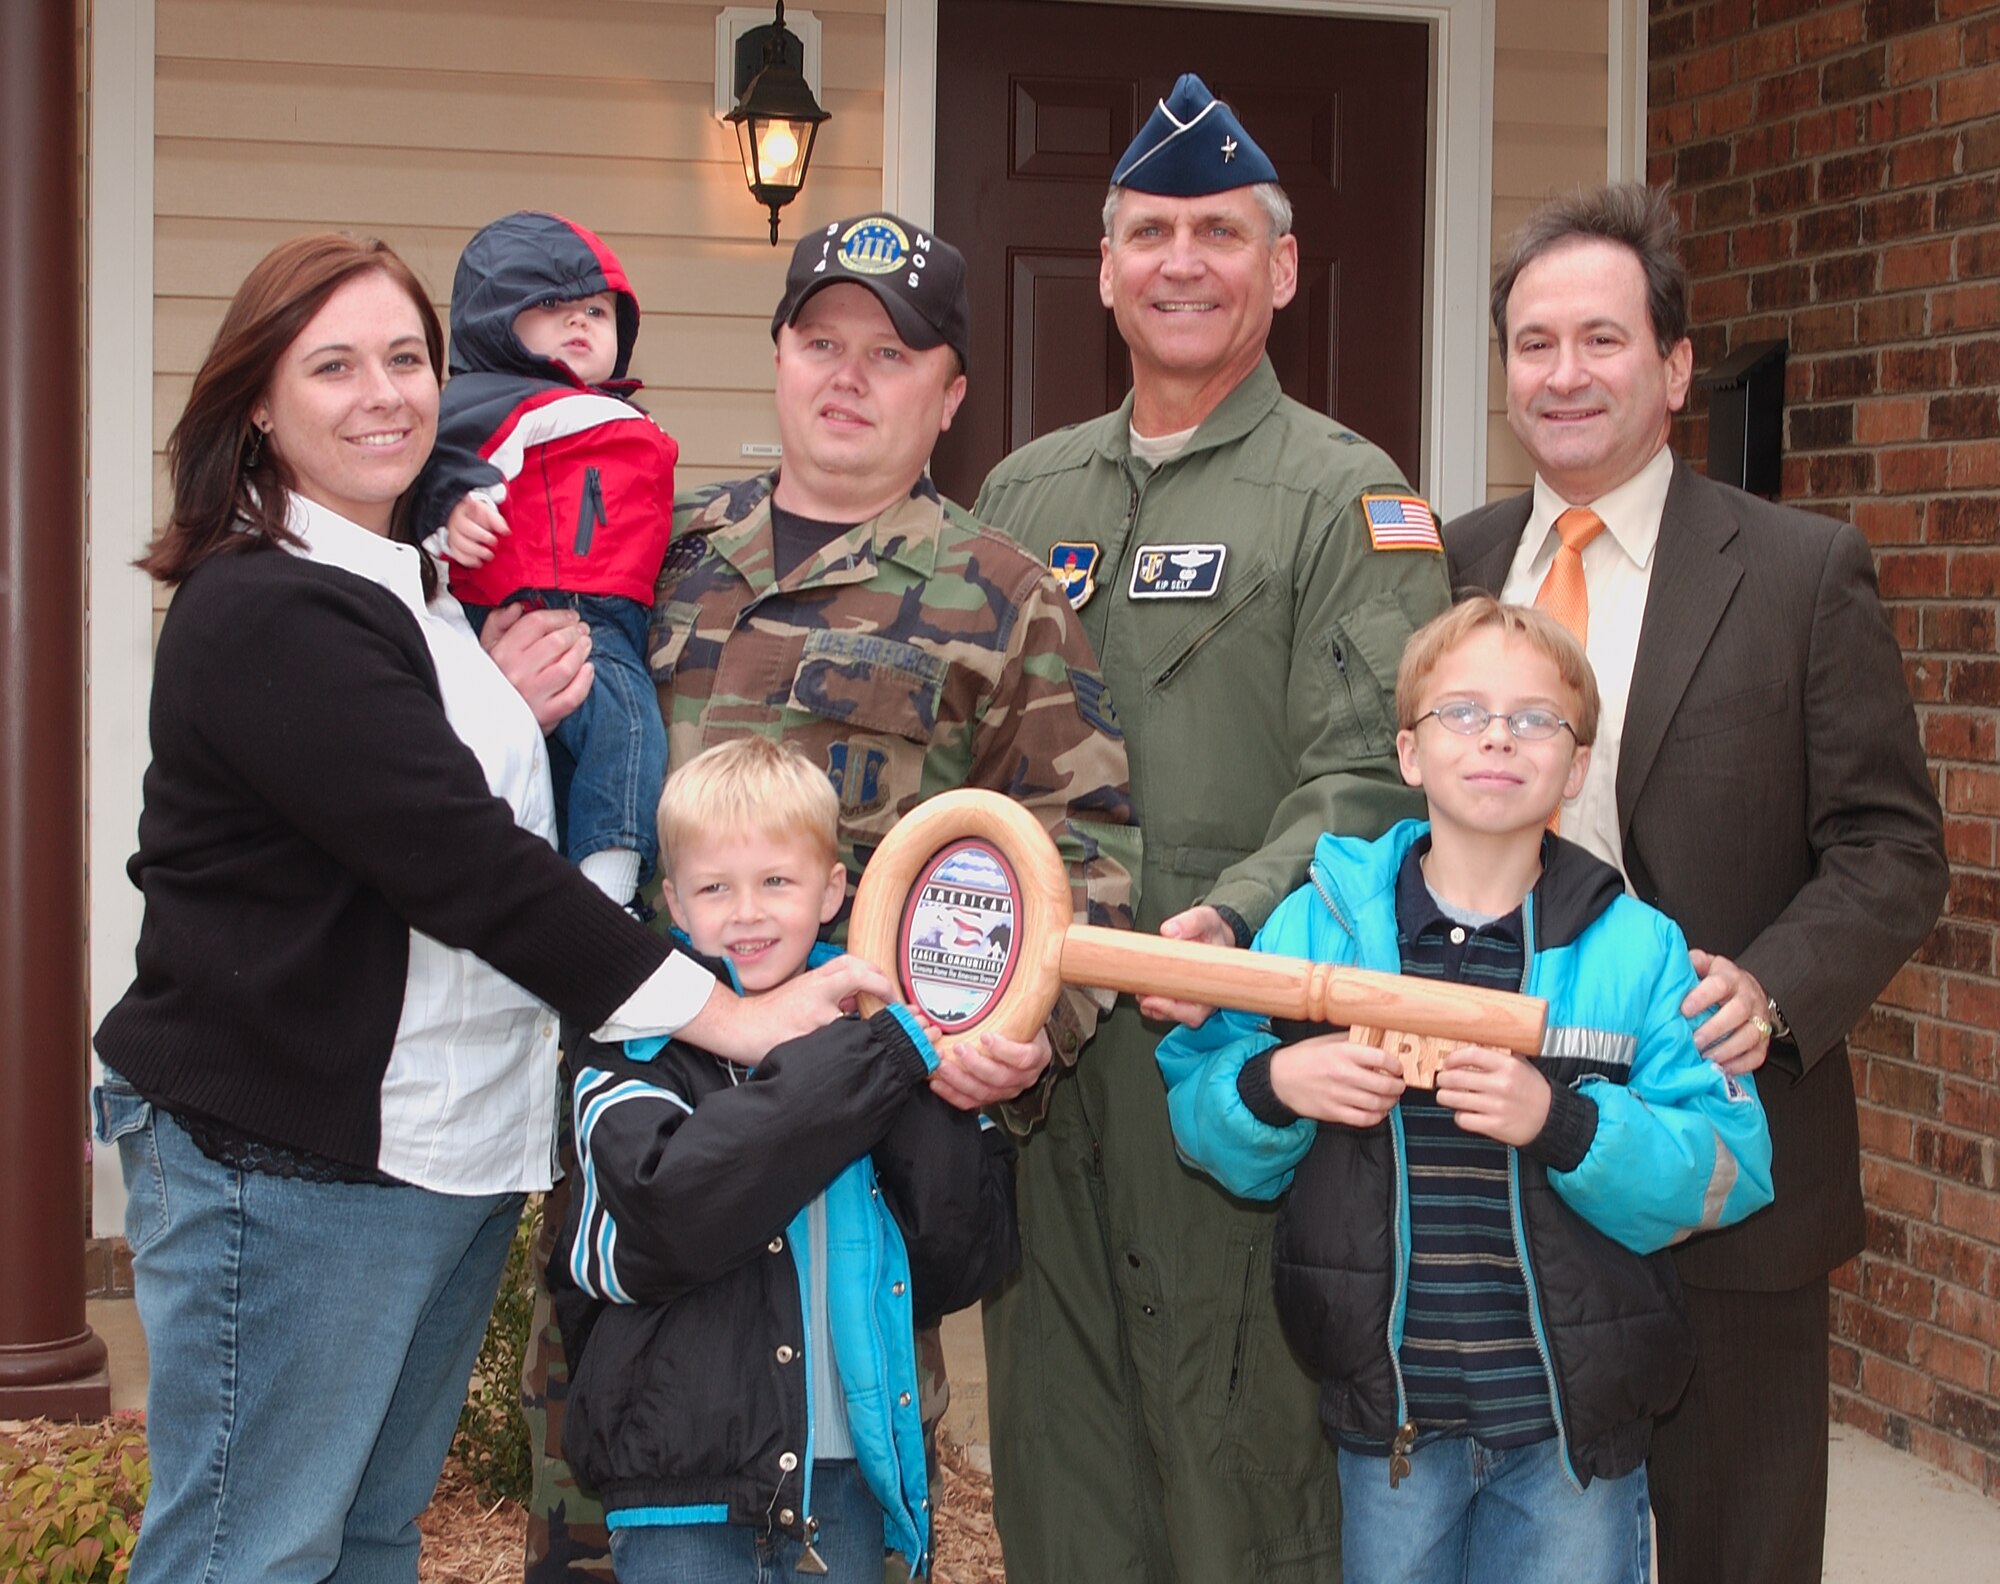 Brig. Gen. Kip Self, (right center) 314th Airlift Wing commander, and Howard Lazarus, (top right) American Eagle Communities director of operations, hand a ceremonial key to Staff Sgt. Mark Brown (left center) and his wife, Jennifer, and children, Dominic, 10, Christian, 7, and Carson, 1, during the base housing grand opening ceremony Nov. 1. The new houses are more spacious and have more amenities than previous base homes, residents say.